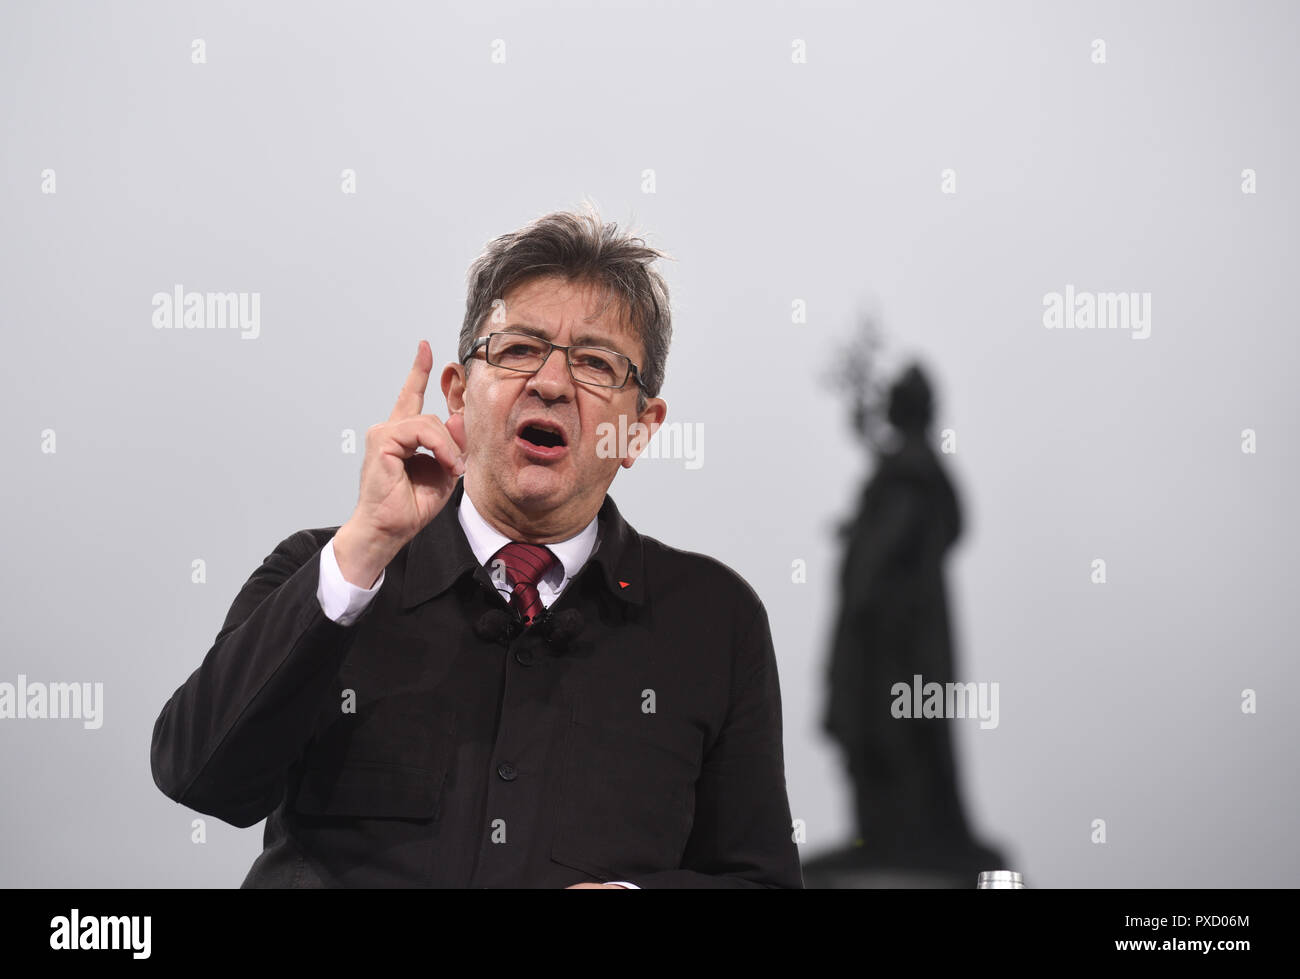 March 18, 2017 - Paris, France: Far-Left leader Jean-Luc Melenchon  addresses his supporters during a mass campaign rally in Place de la  Republique. More than 100 000 people attend his march for